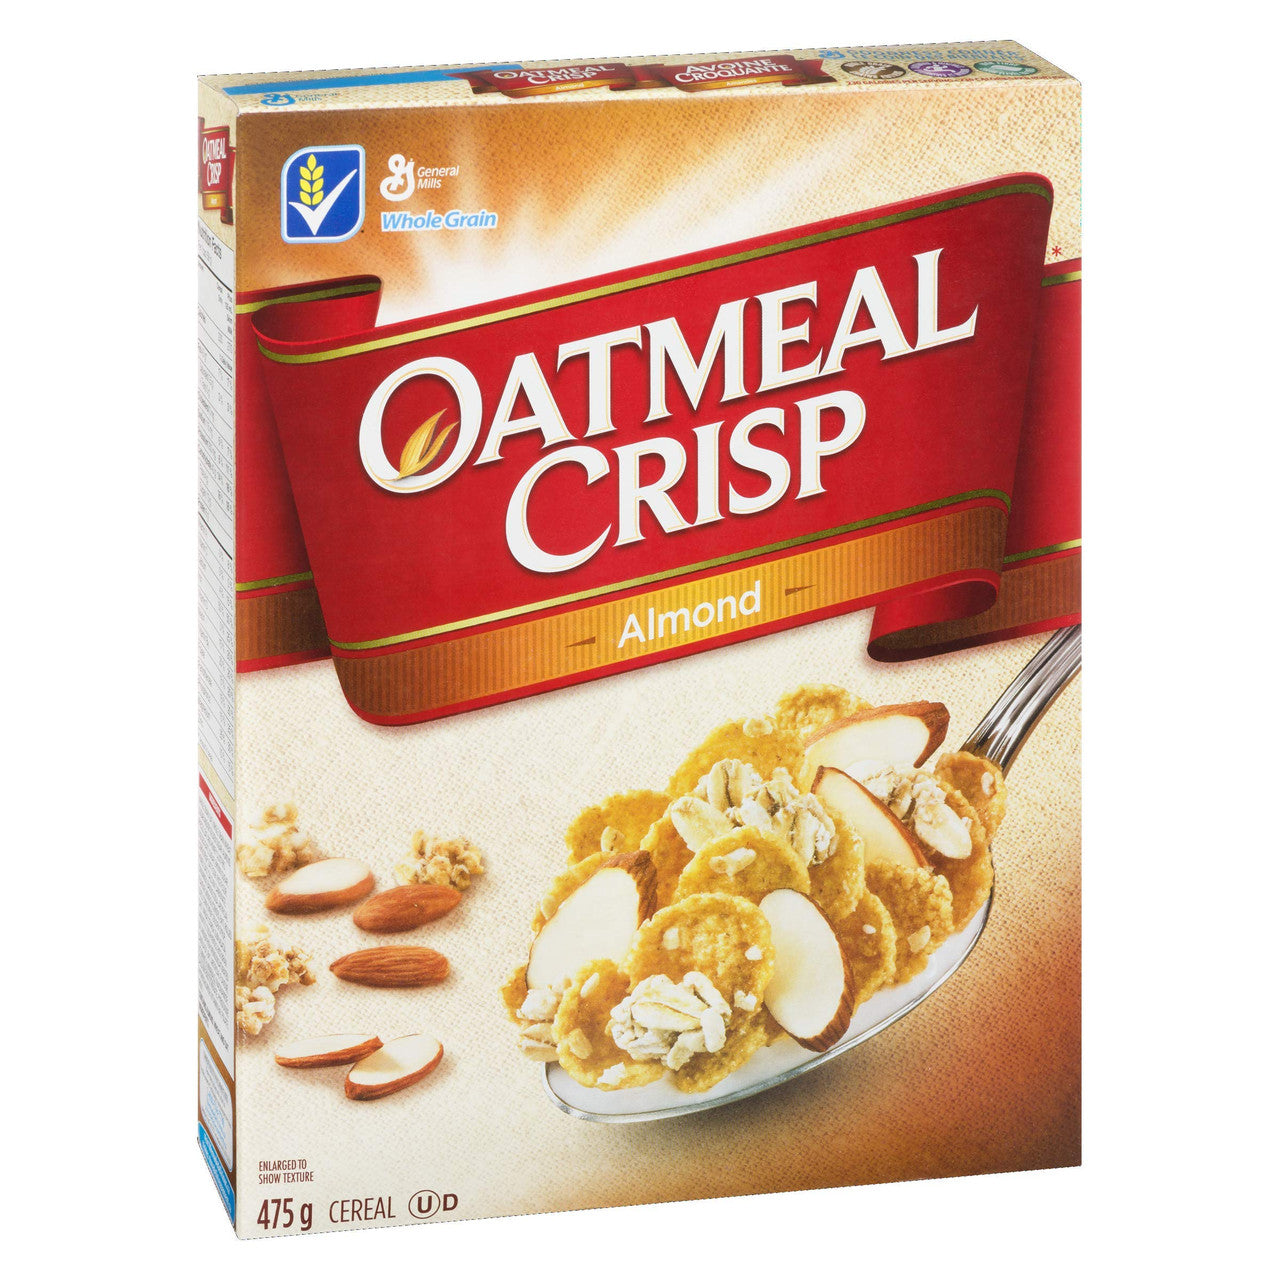 Oatmeal Crisp Almond, 475g/16.7oz, (Imported from Canada)